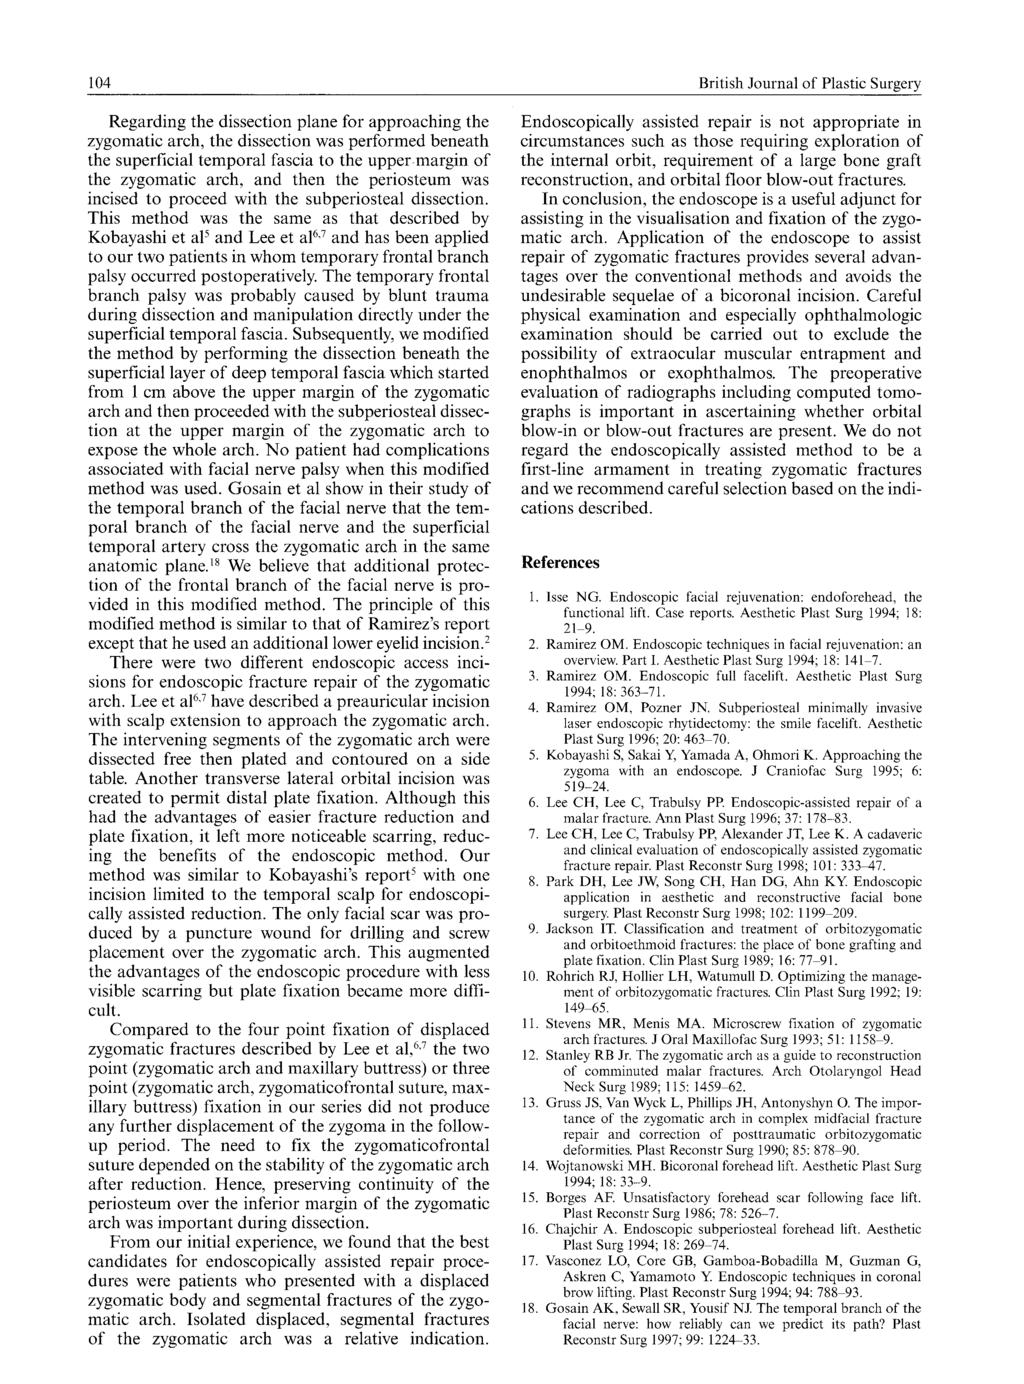 104 British Journal of Plastic Surgery Regarding the dissection plane for approaching the zygomatic arch, the dissection was performed beneath the superficial temporal fascia to the uppermargin of